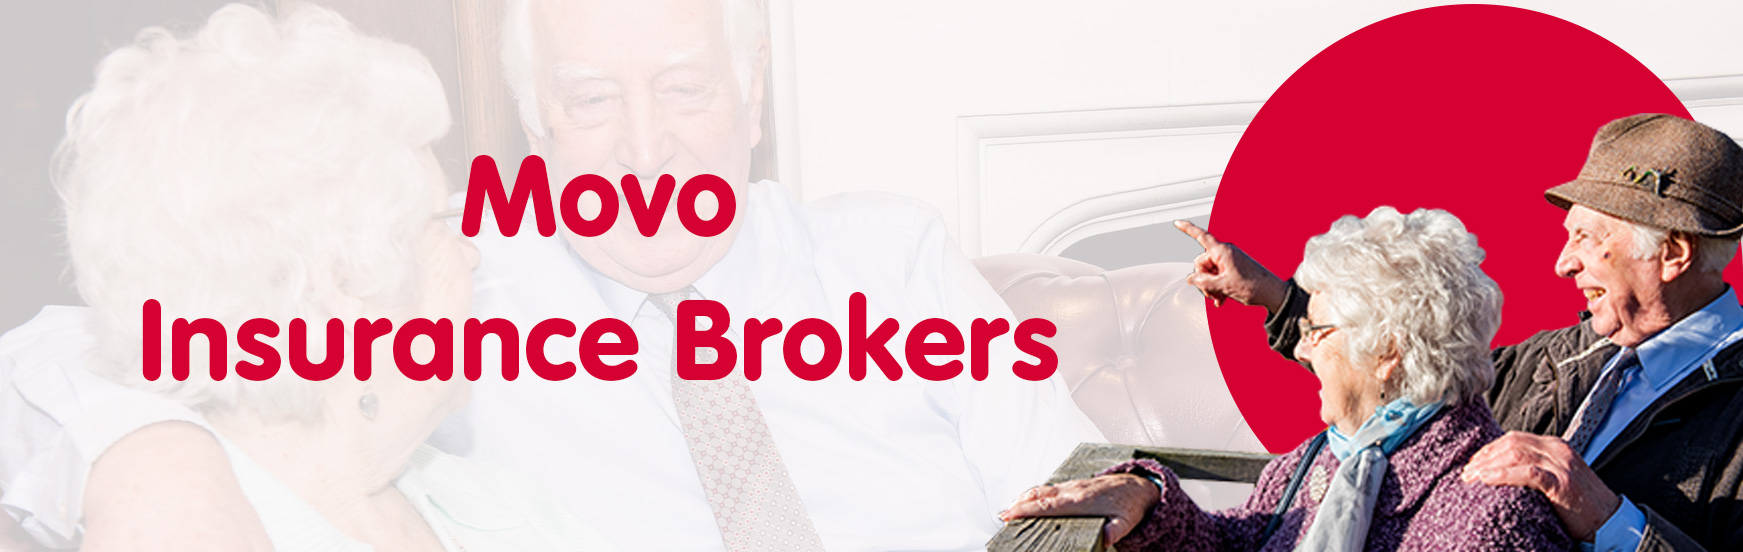 age movo insurance brokers